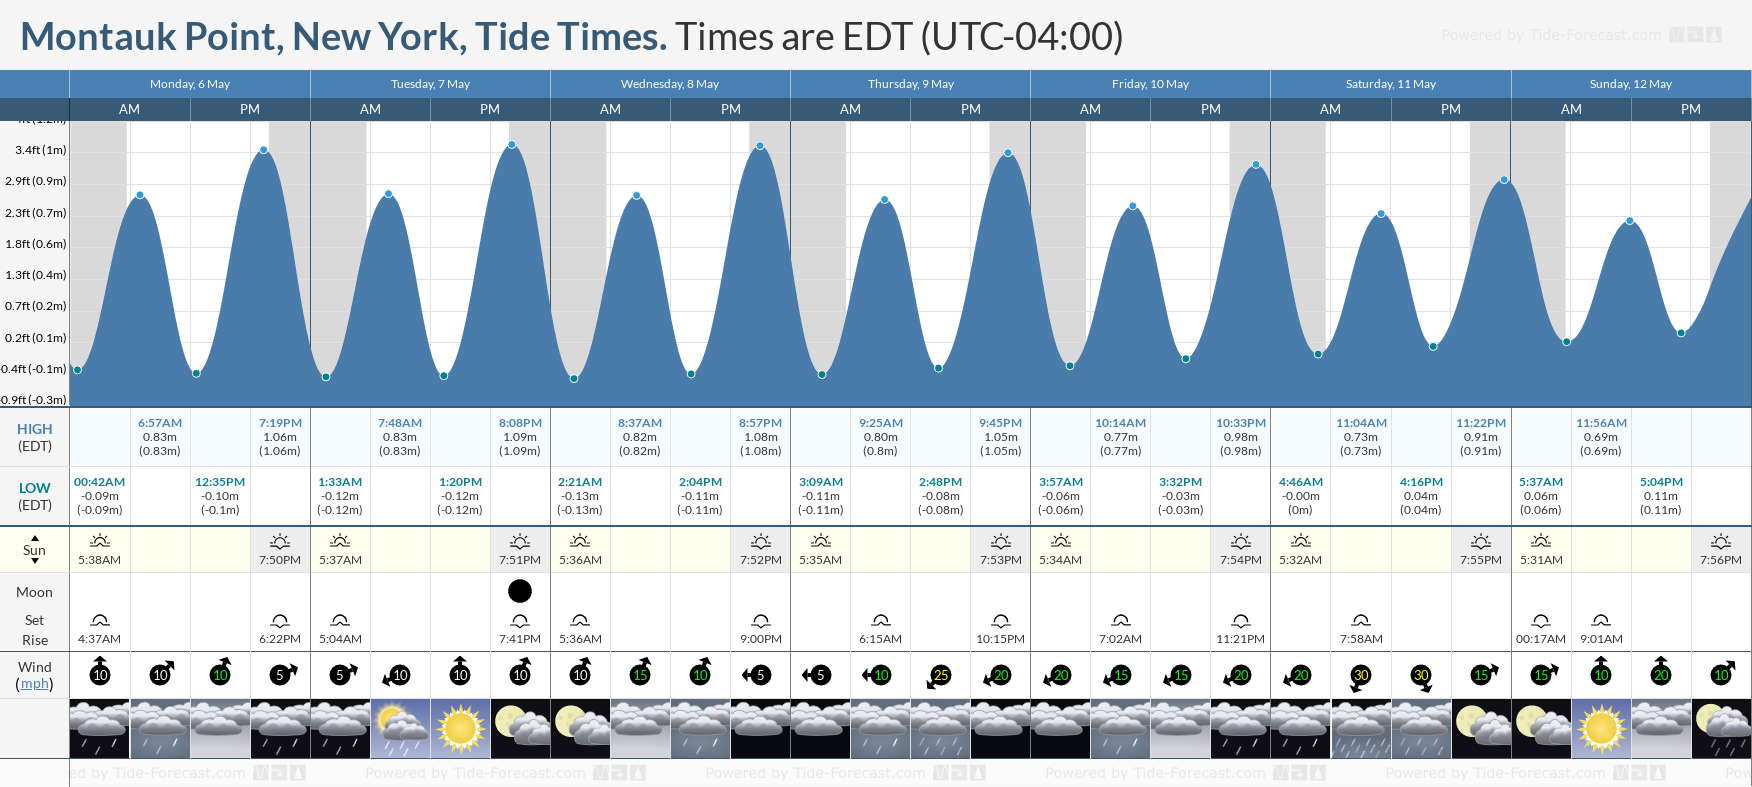 Montauk Point, New York Tide Chart including high and low tide tide times for the next 7 days